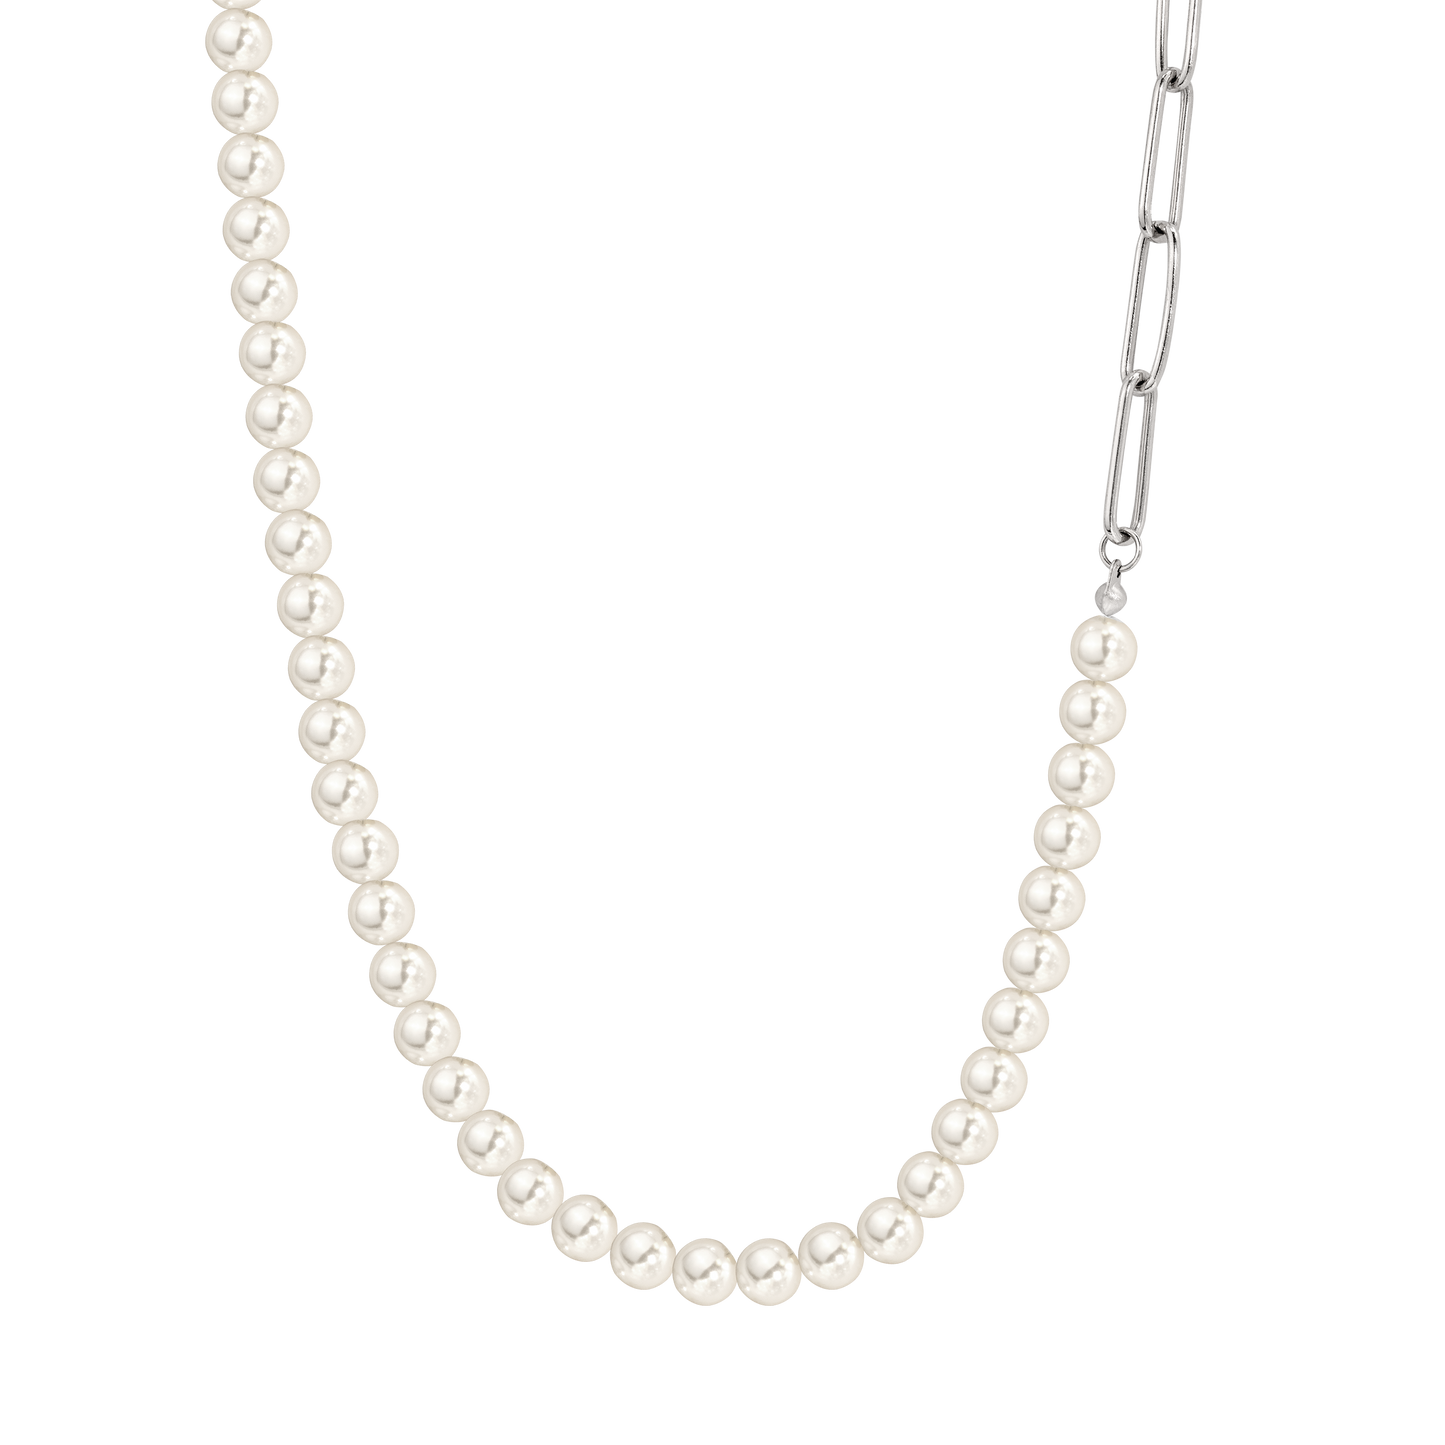 Chain & Pearl Necklace Silver